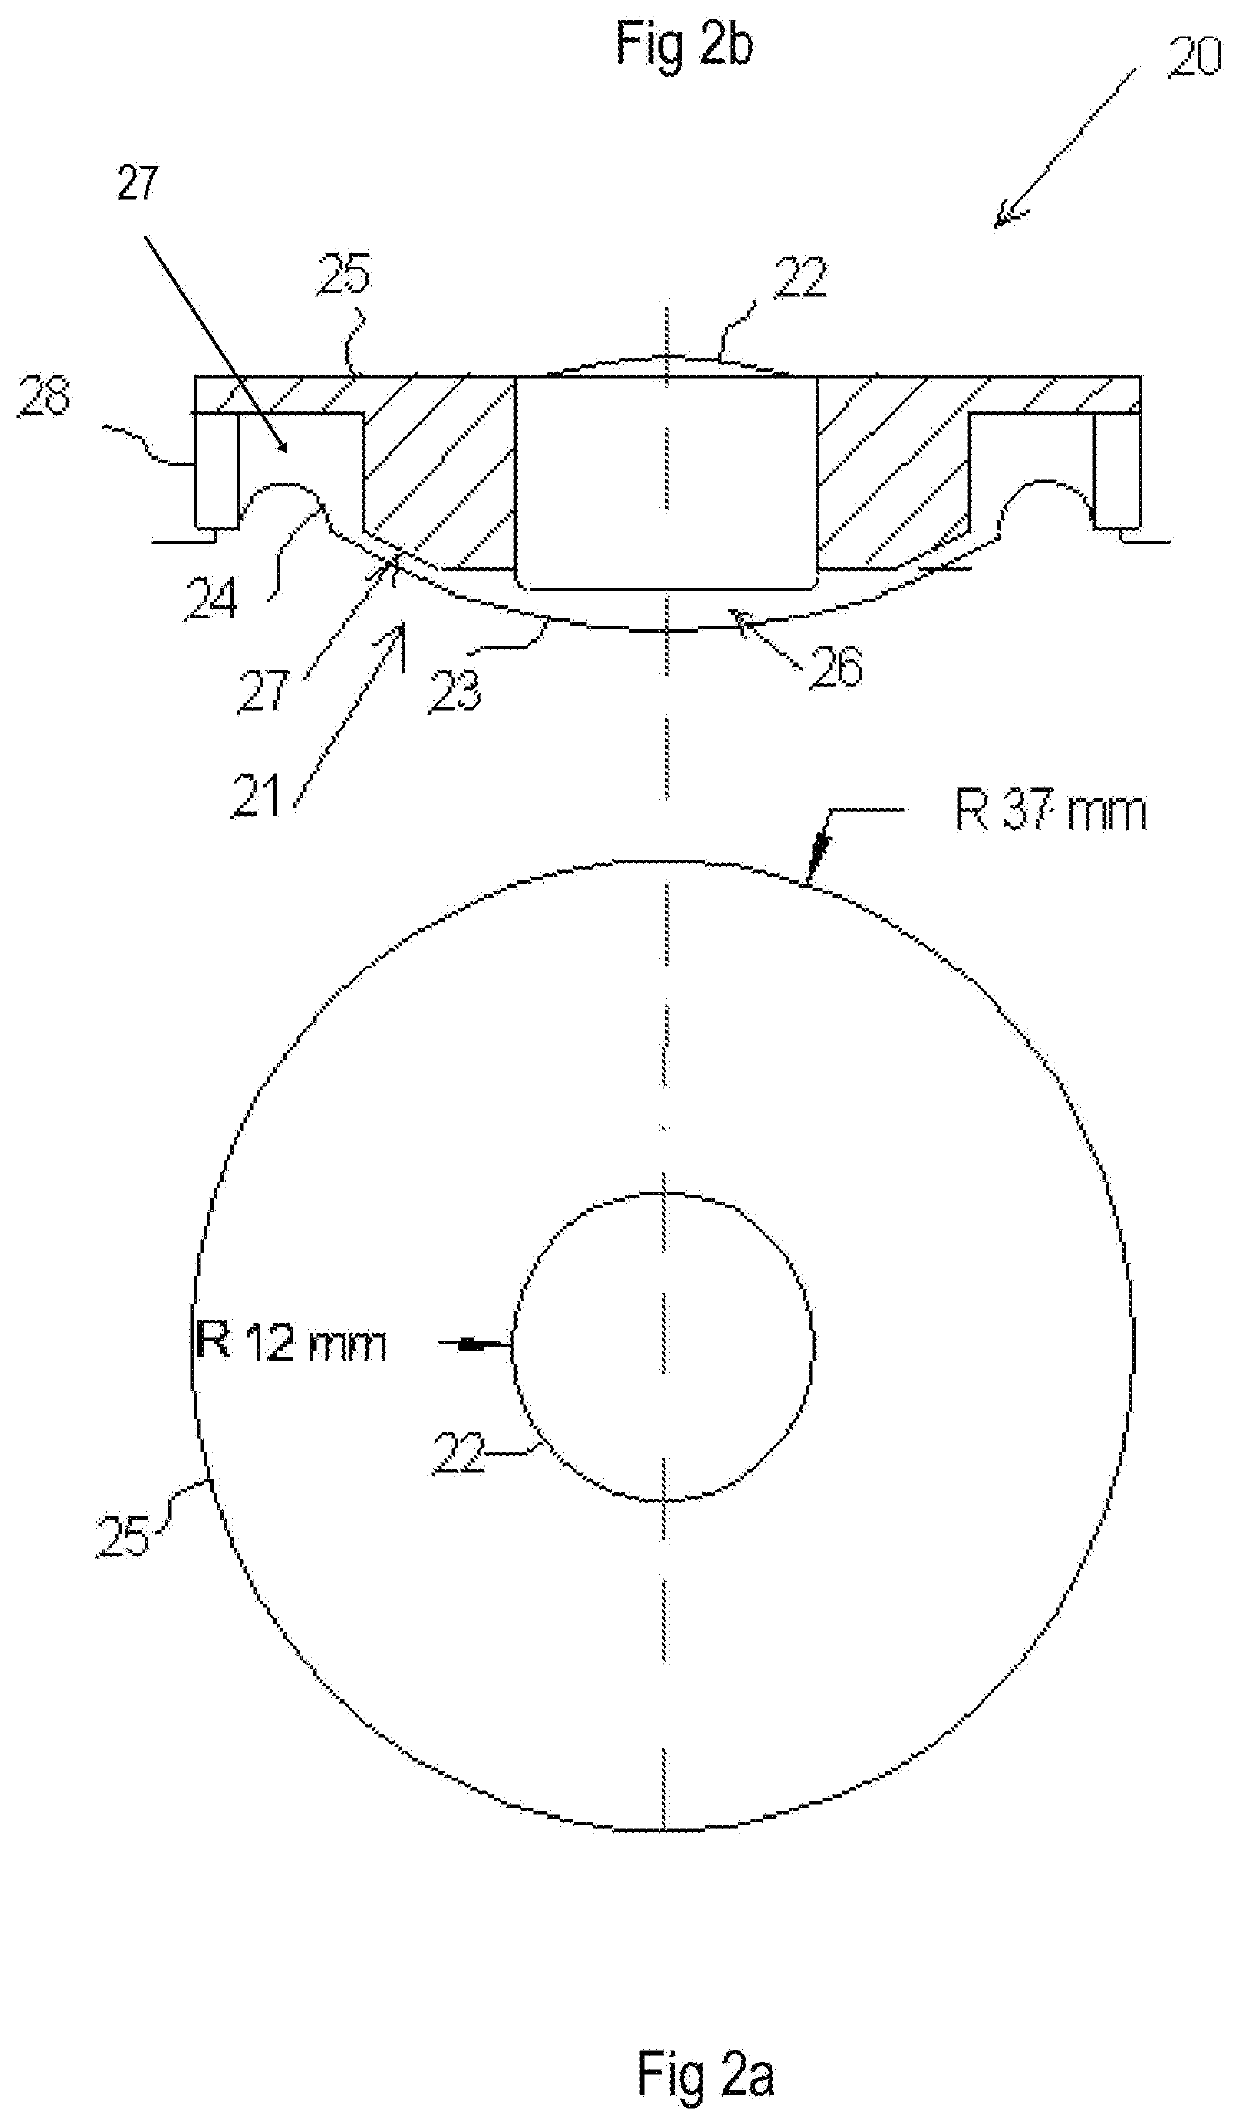 Acoustic filter for a coaxial electro-acoustic transducer